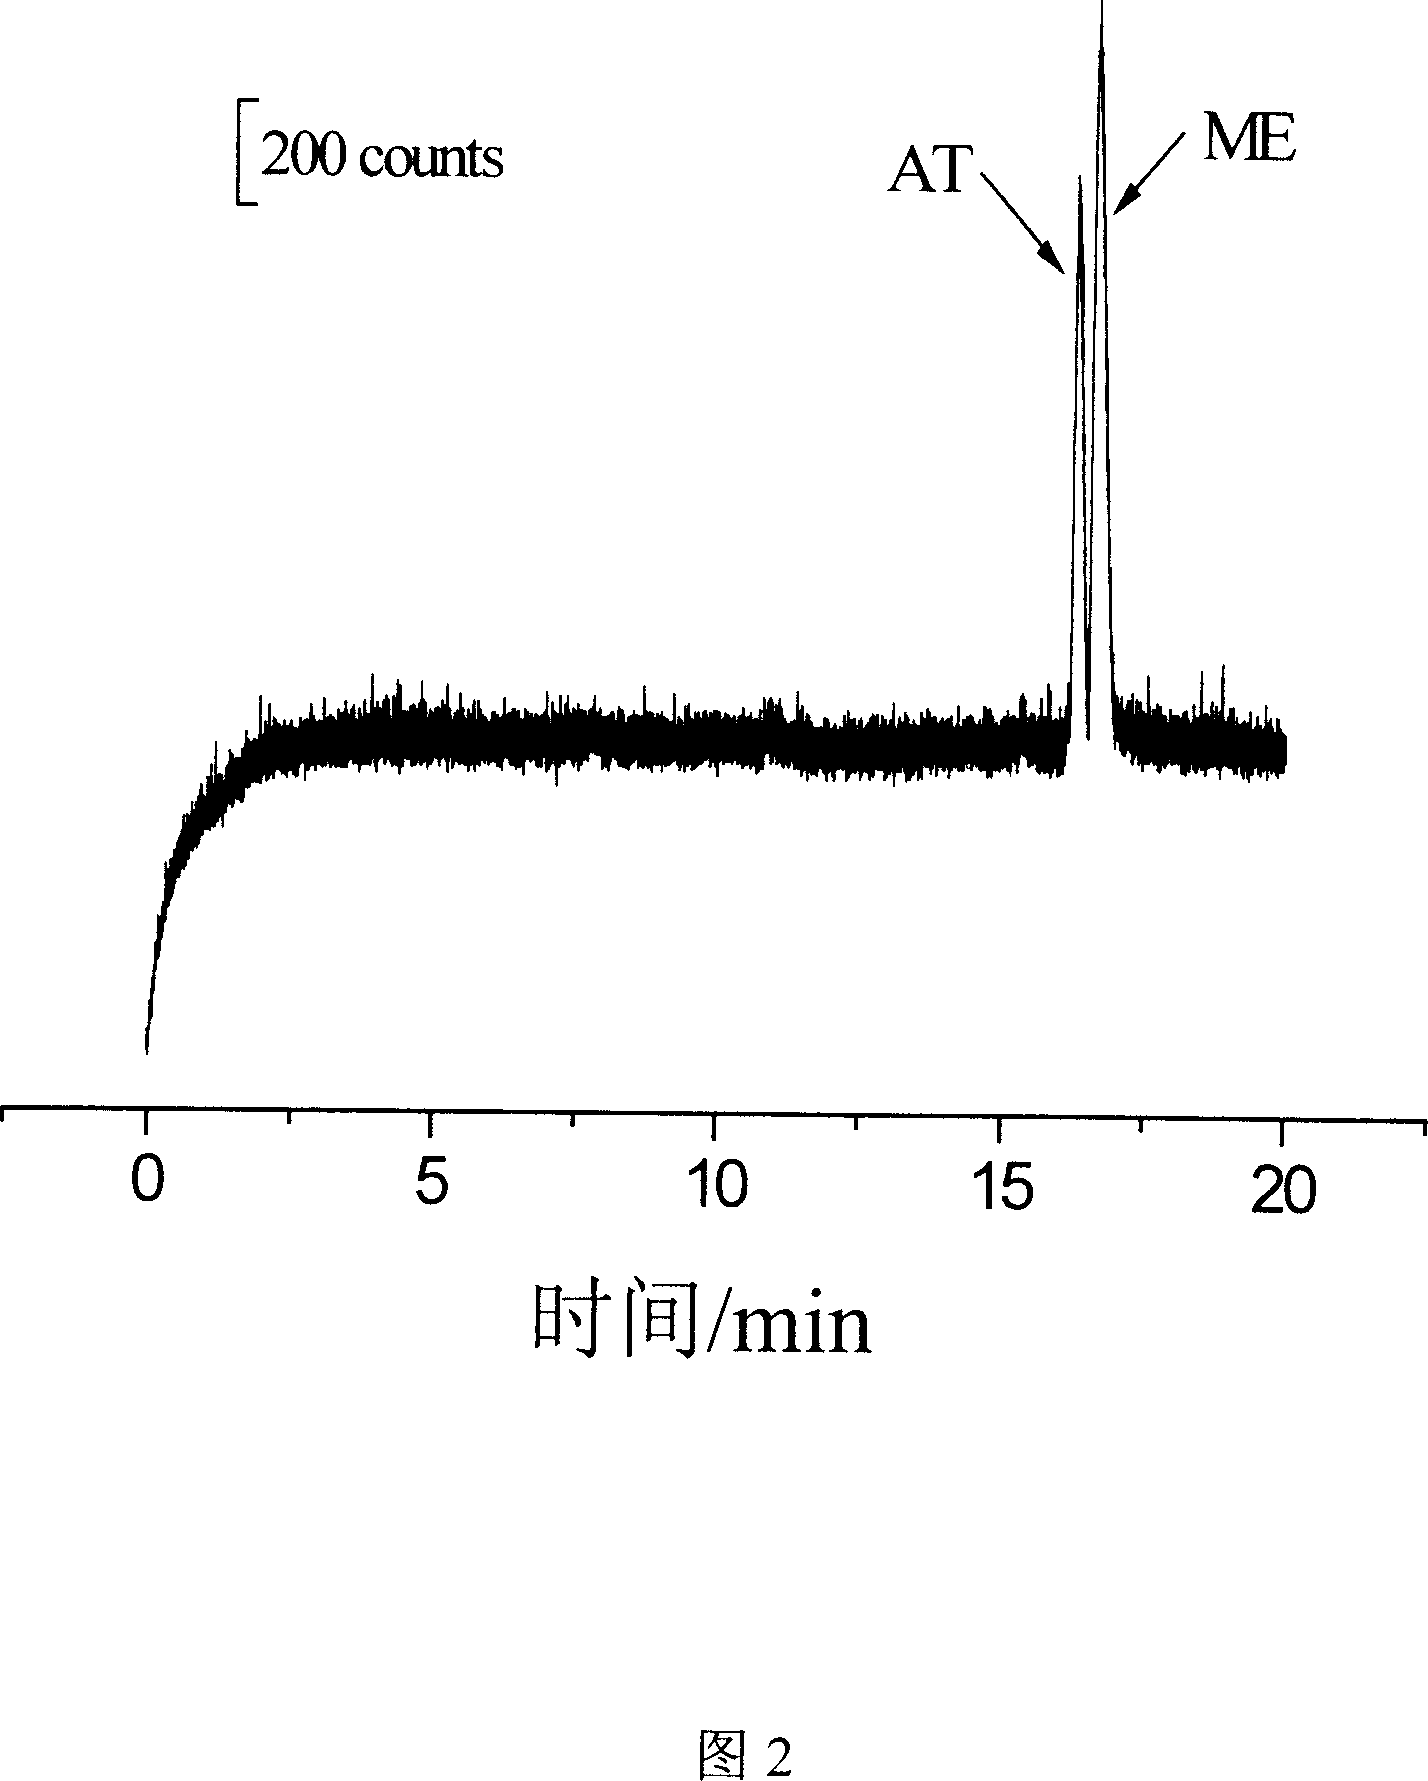 Method for capillary electrophoresis electrochemiluminescence detection of metoprolol and atenolol